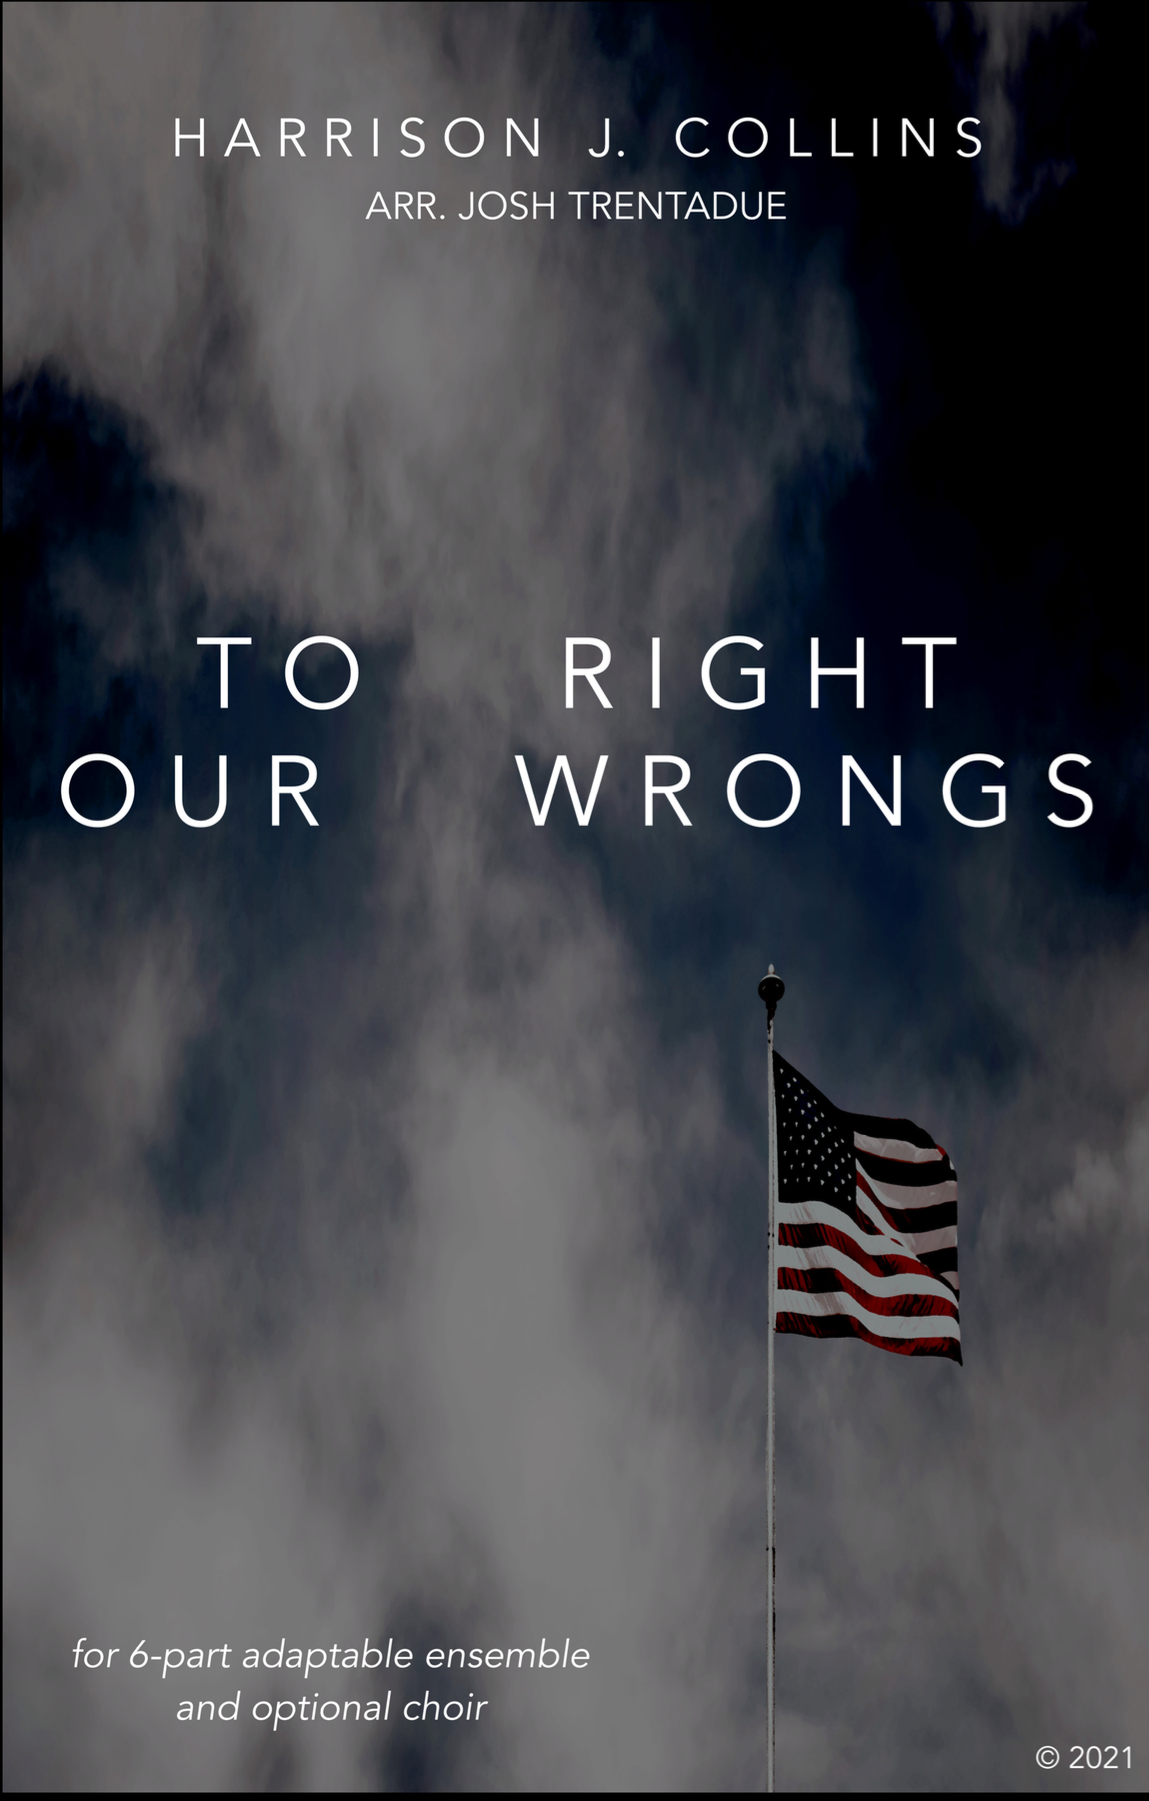 To Right Our Wrongs (Flex Version) by Harrison Collins, arr. Trentadue